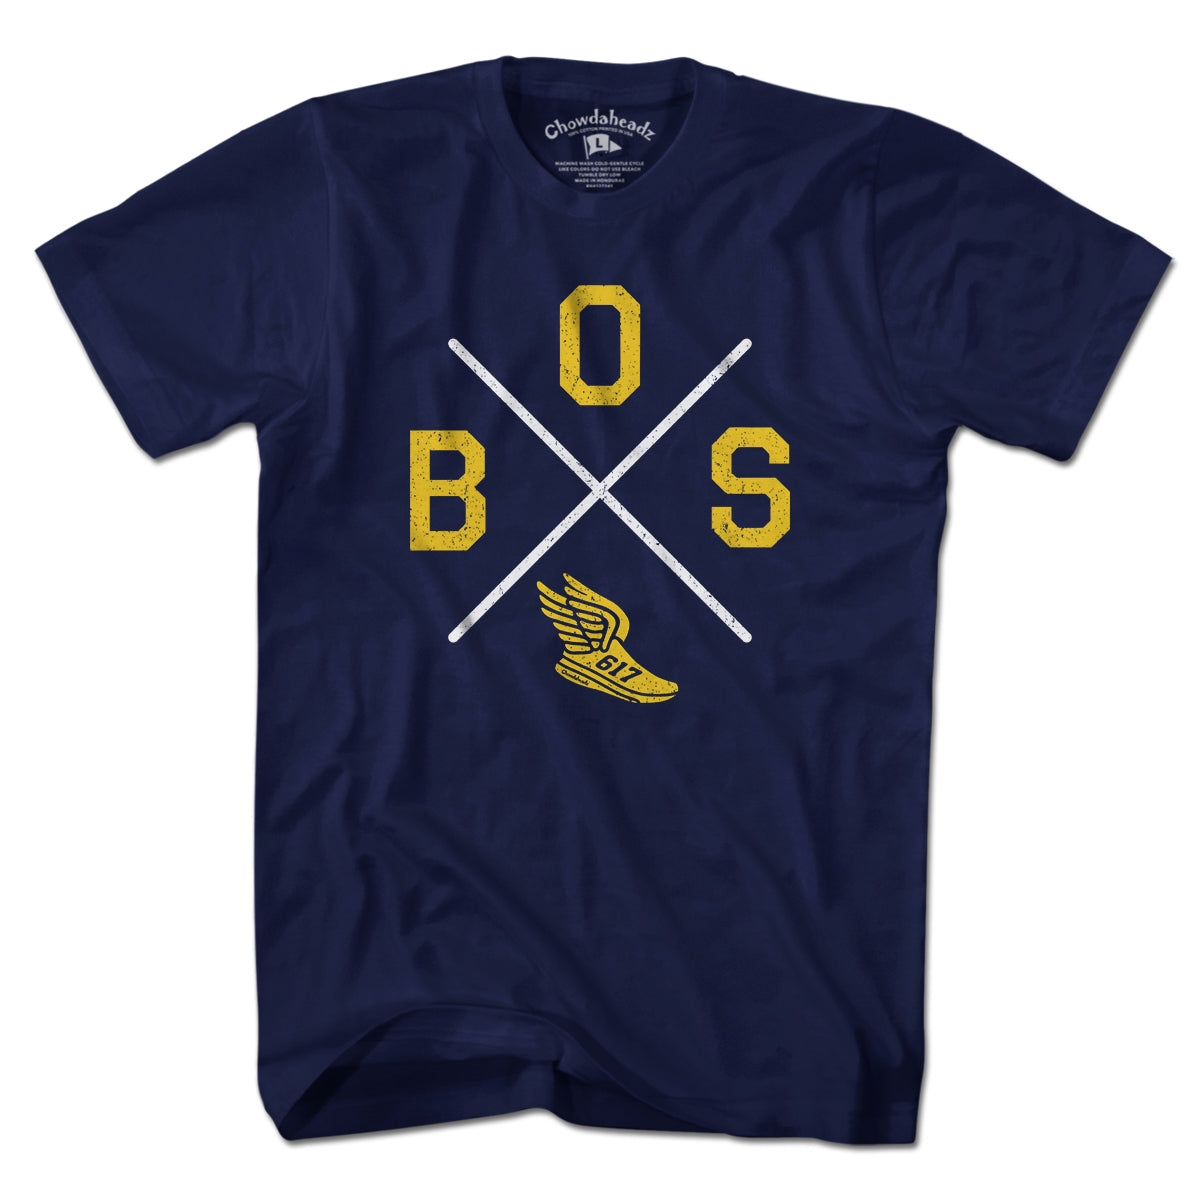 BOS Sneaker Crossed Out T-Shirt - Chowdaheadz